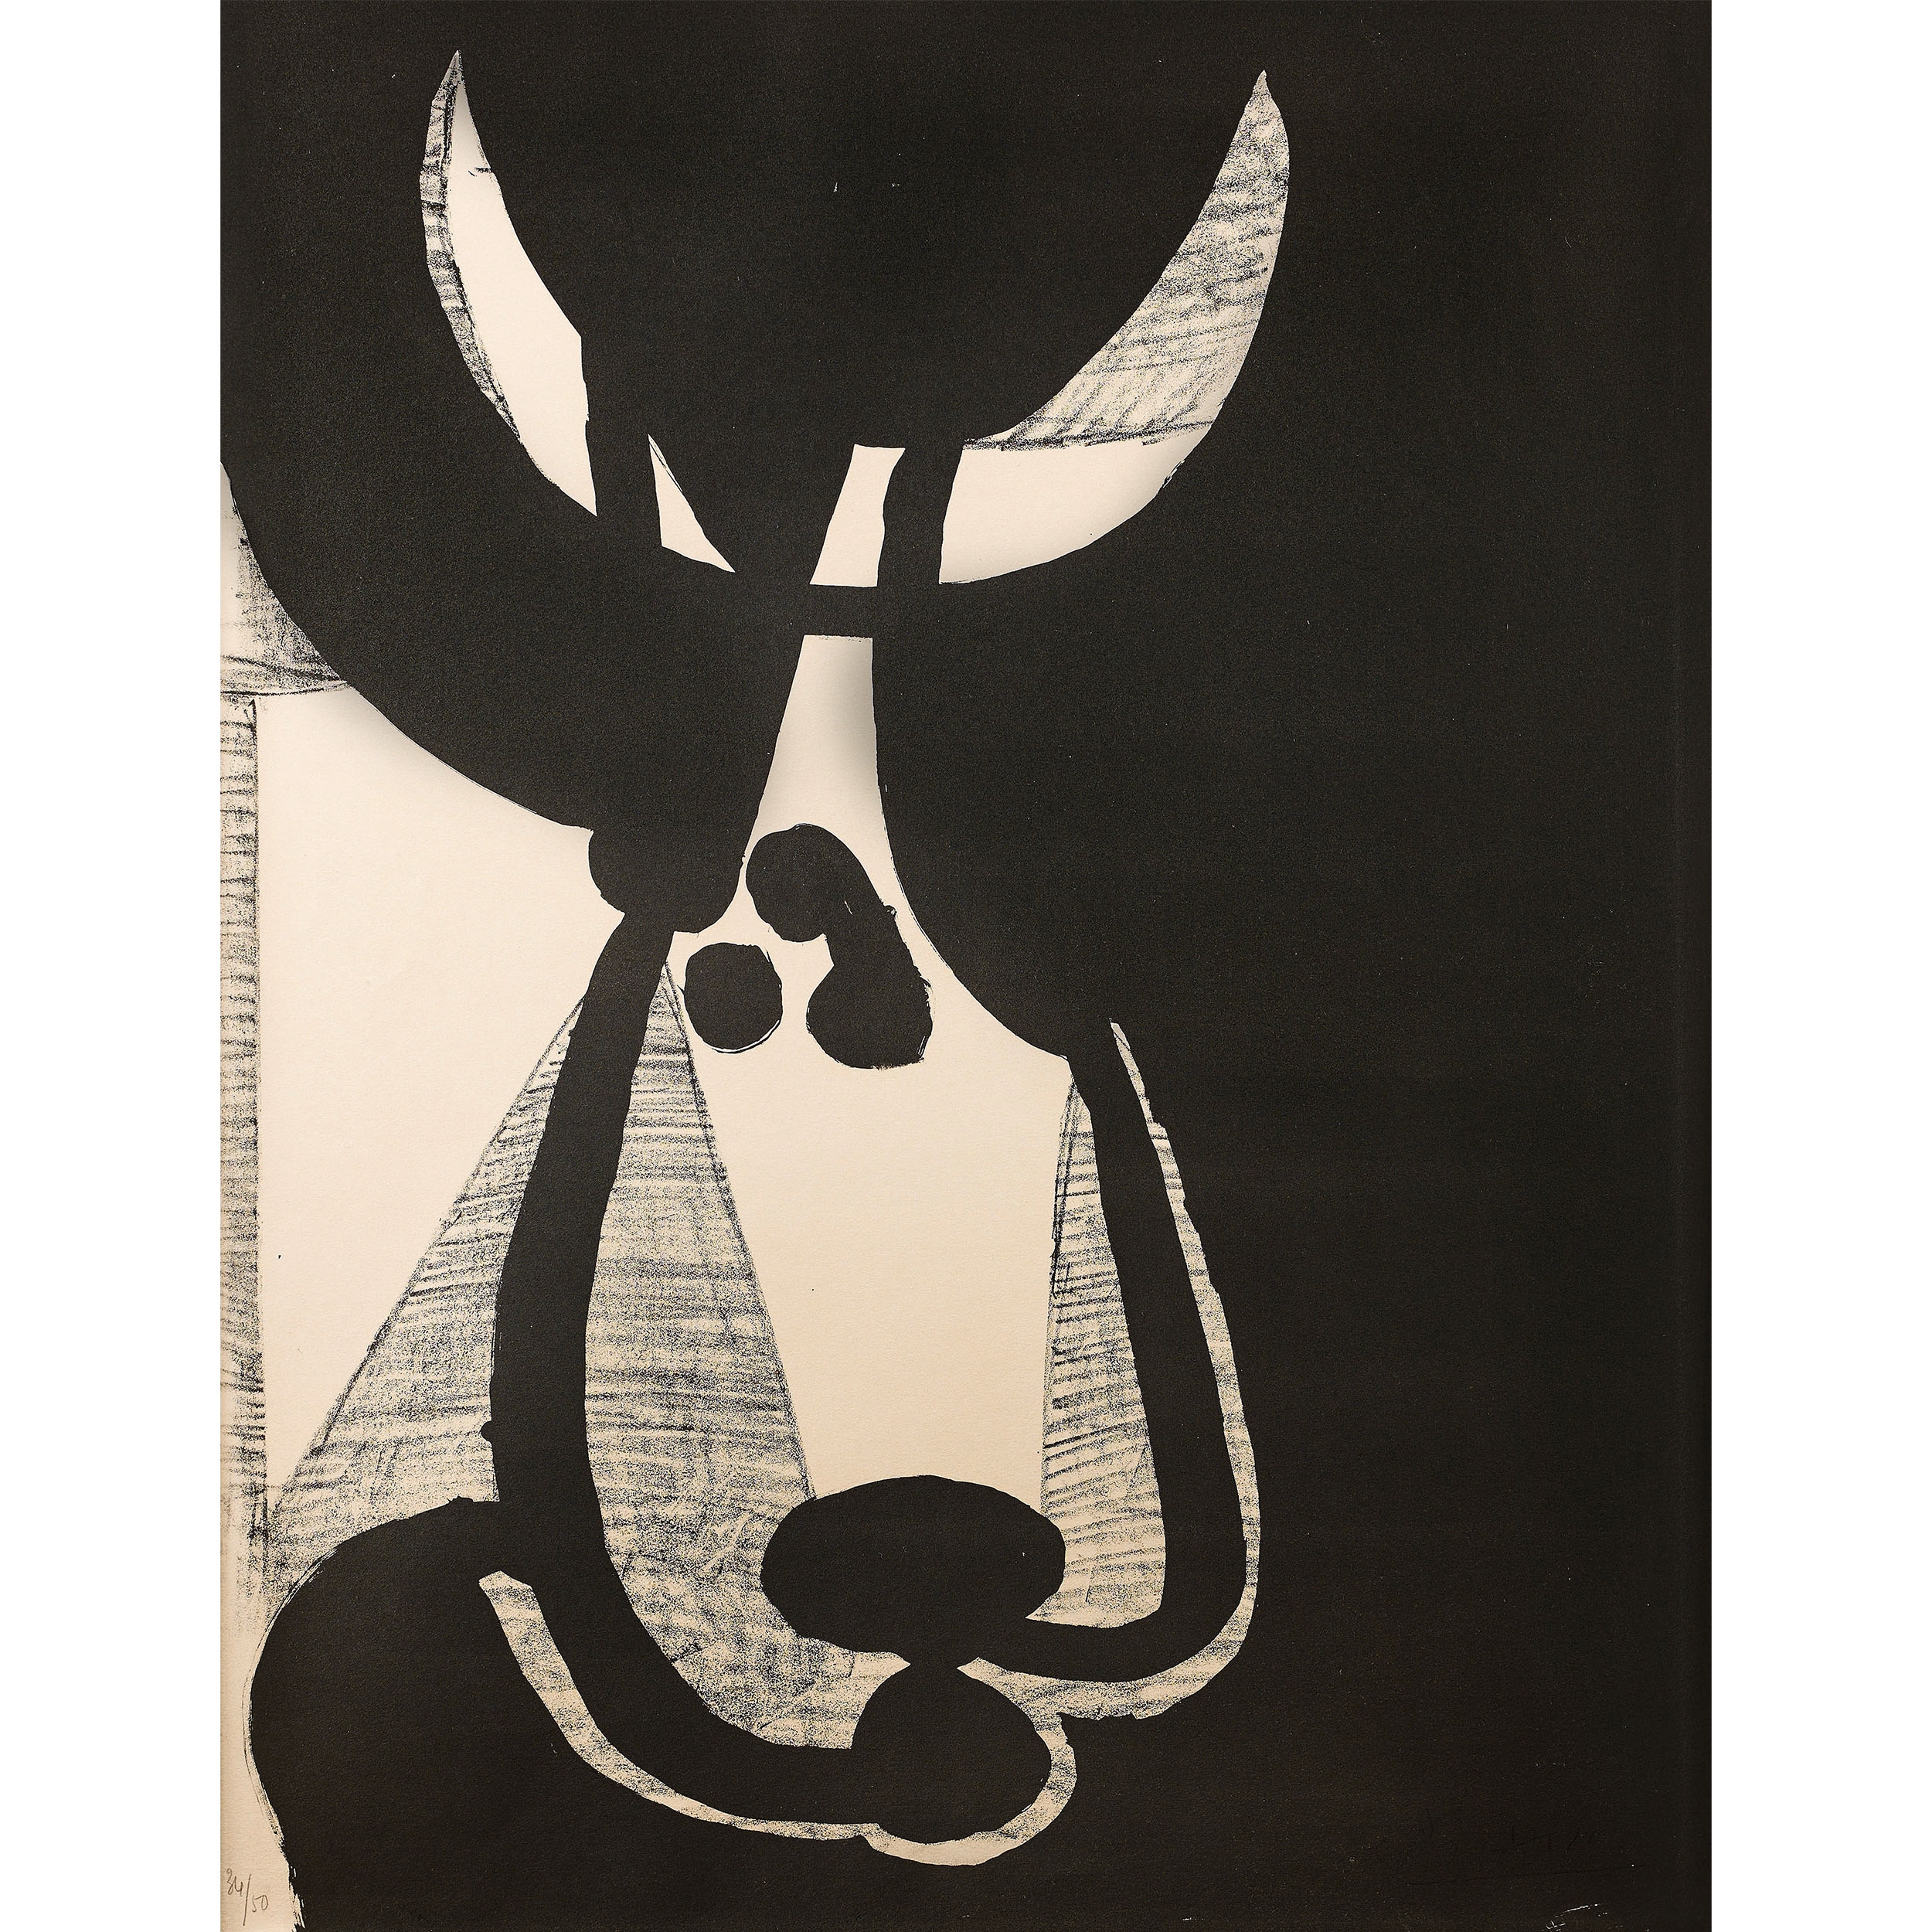 Artwork by Pablo Picasso, Bull's head, turned left, November 1948, Made of Lithograph on Arches vellum